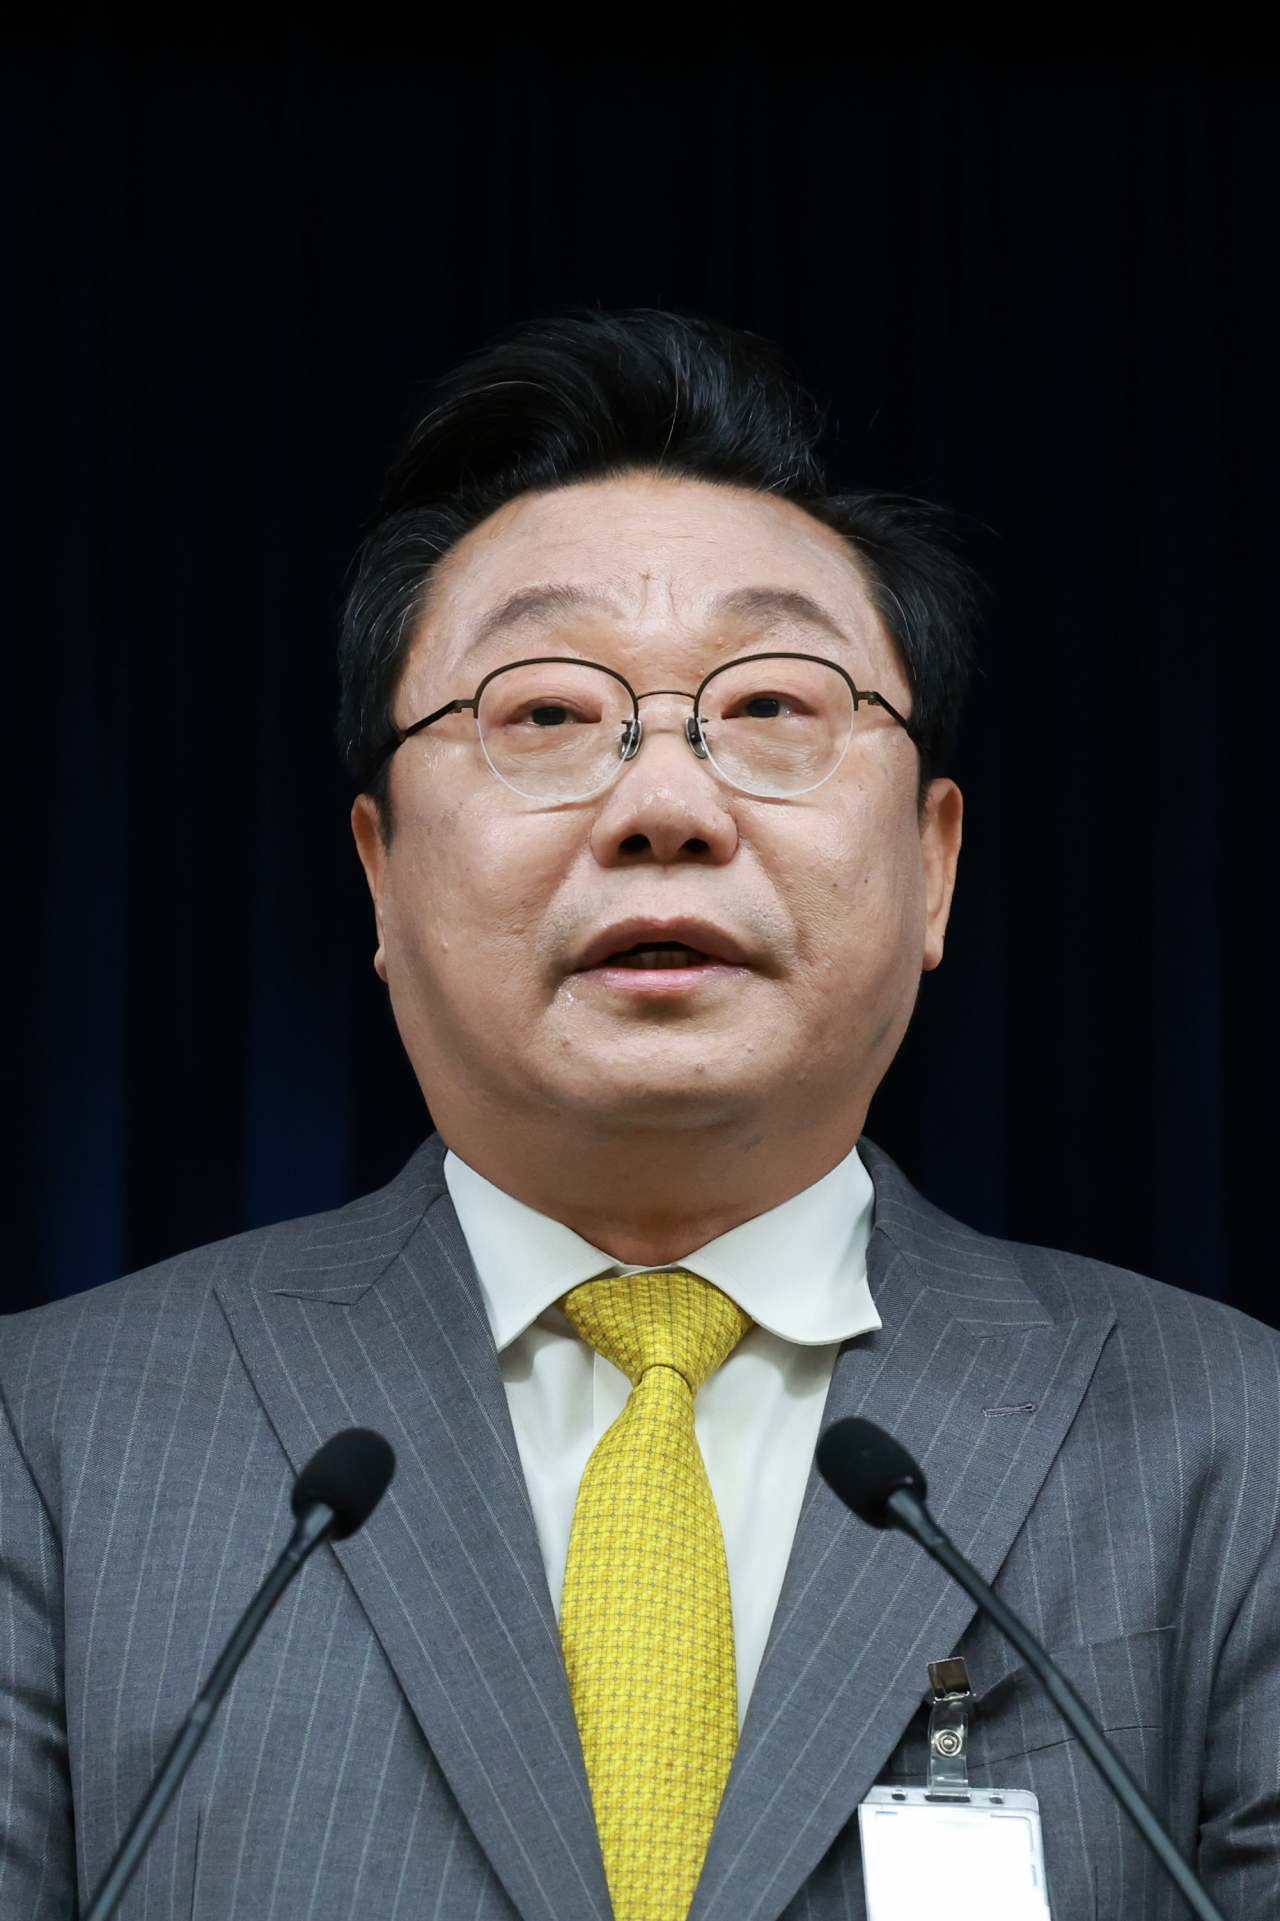 Joo Hyung-hwan, vice chairman of the Presidential Committee on Aging Society and Population Policy, speaks after his appointment to the post on Monday. (Yonhap)